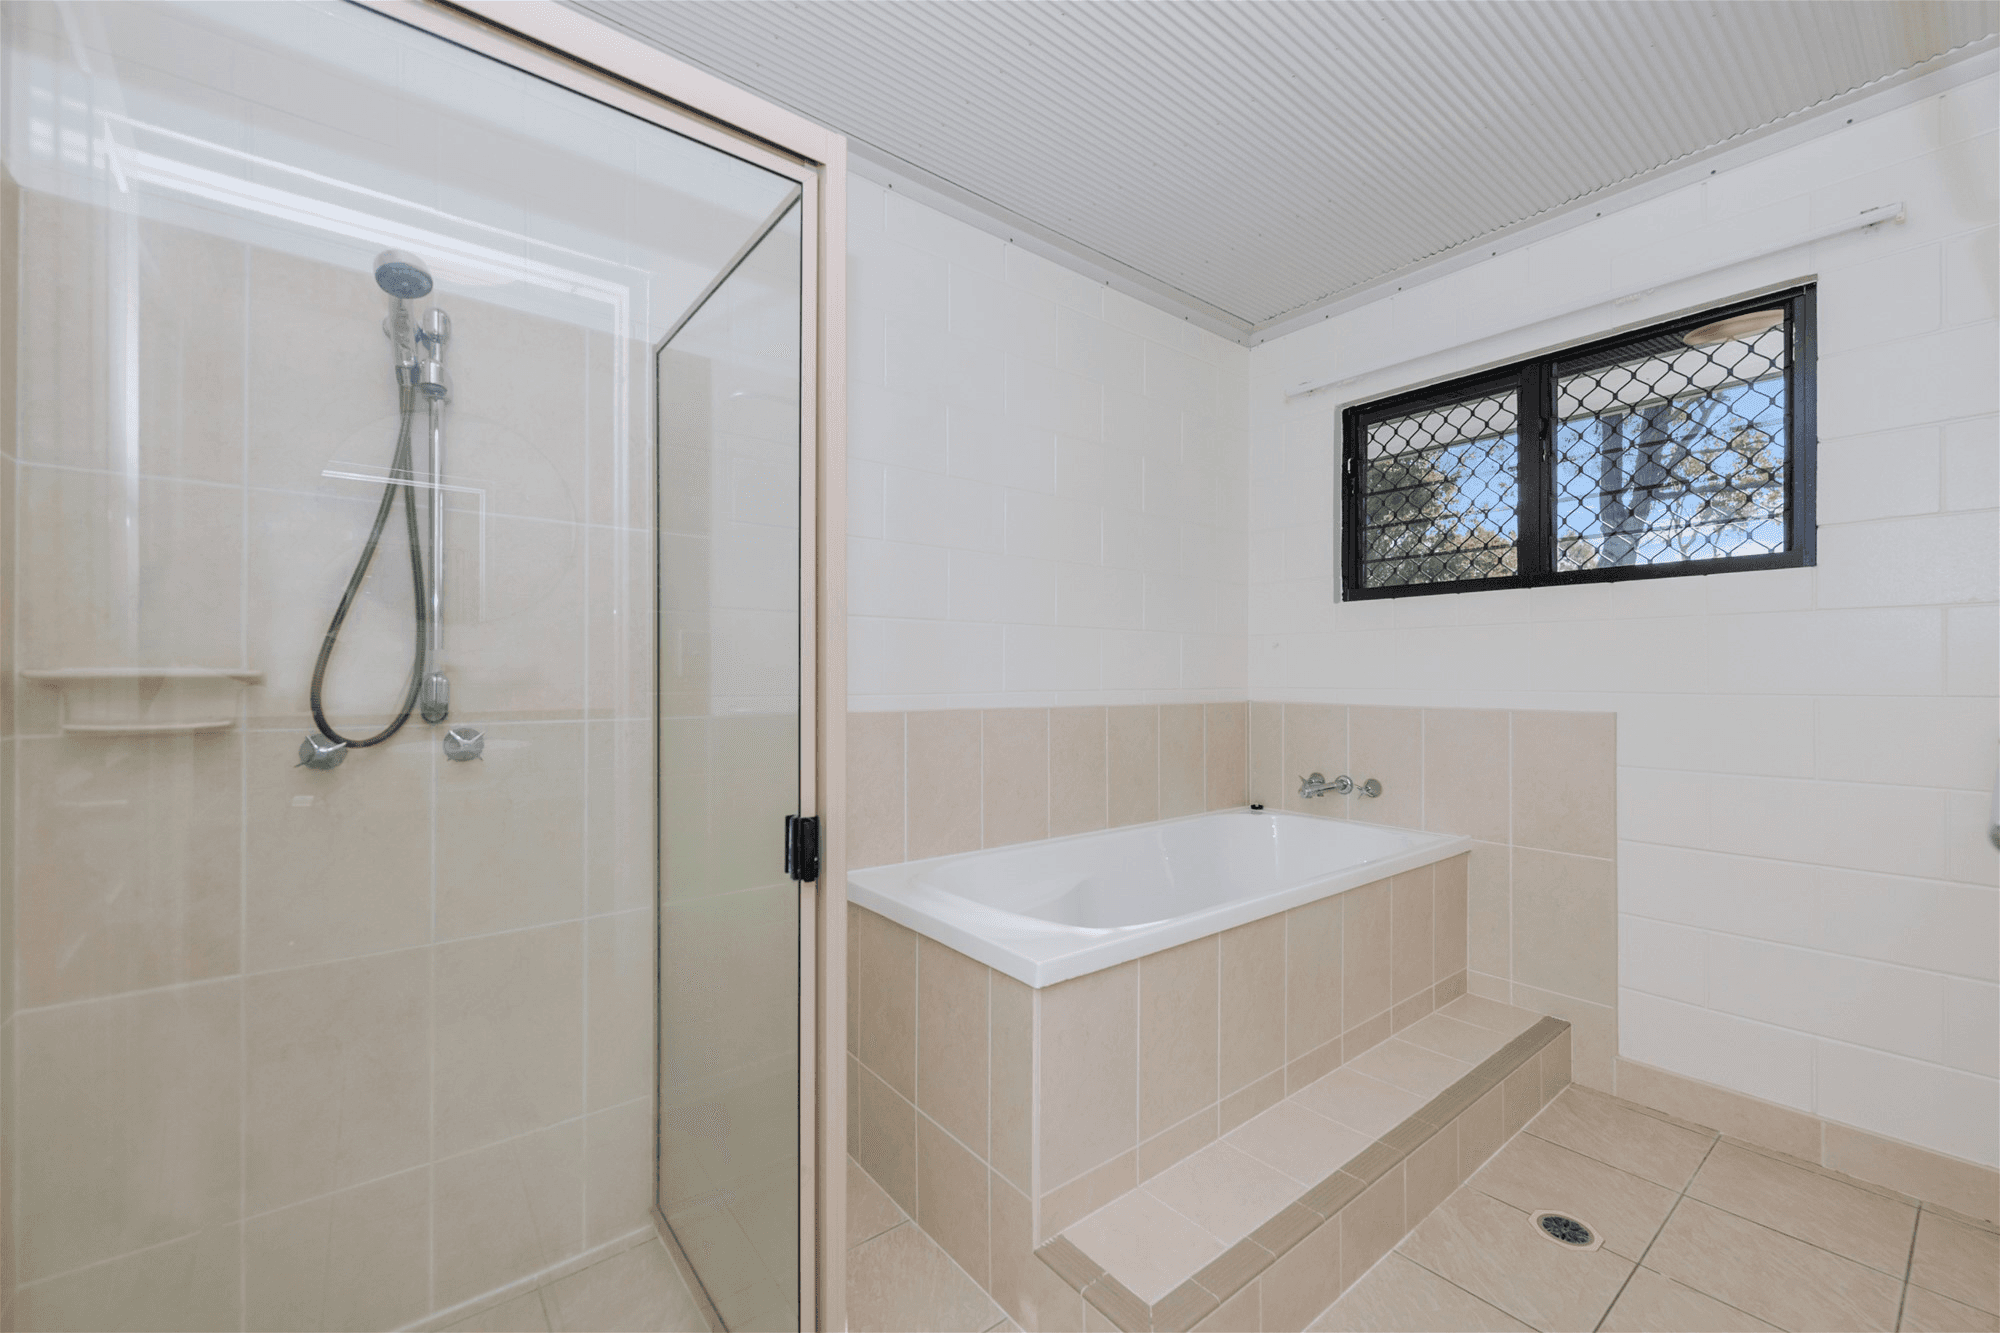 46 OCTAGONAL CRESCENT, KELSO, QLD 4815